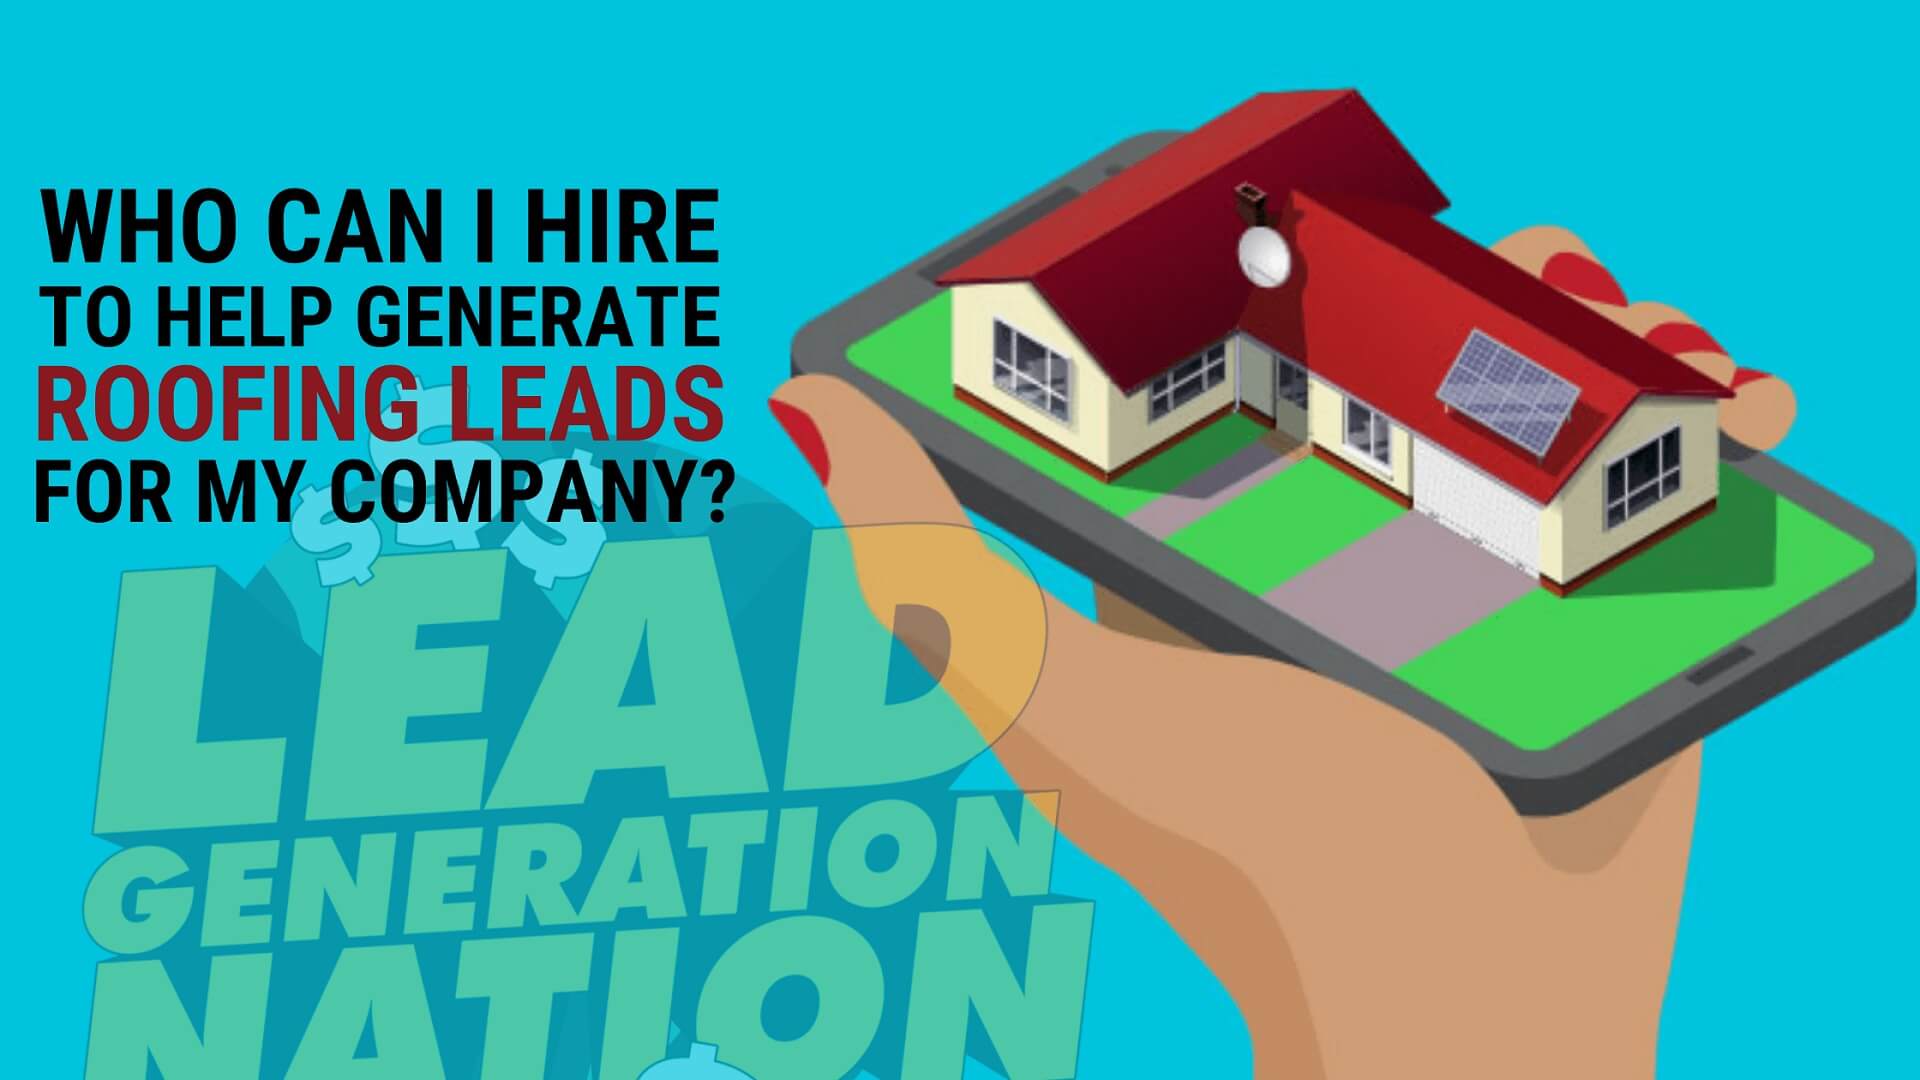 Who_Can I Hire to_Help Generate Roofing Leads_for My Company